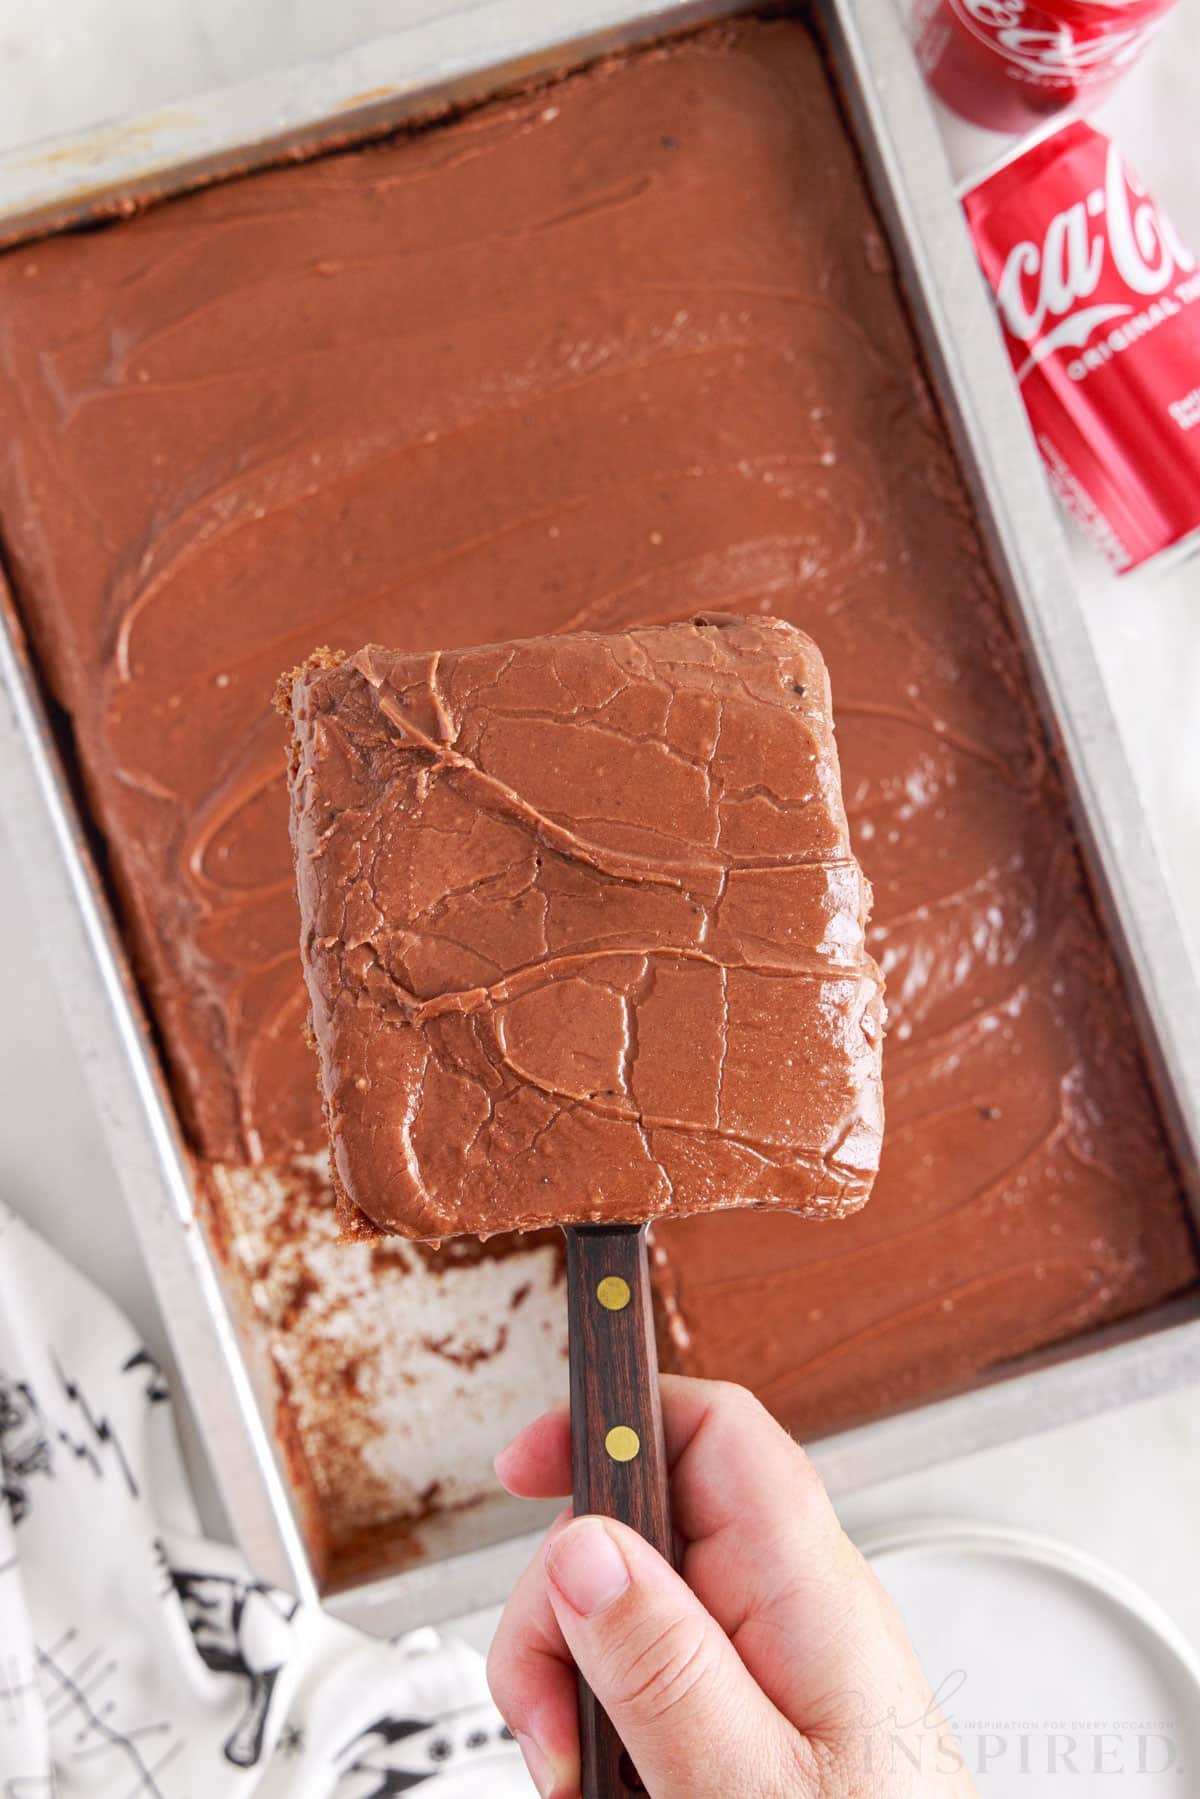 A square slice of Coca Cola Cake being lifted from the 9x13 pan.